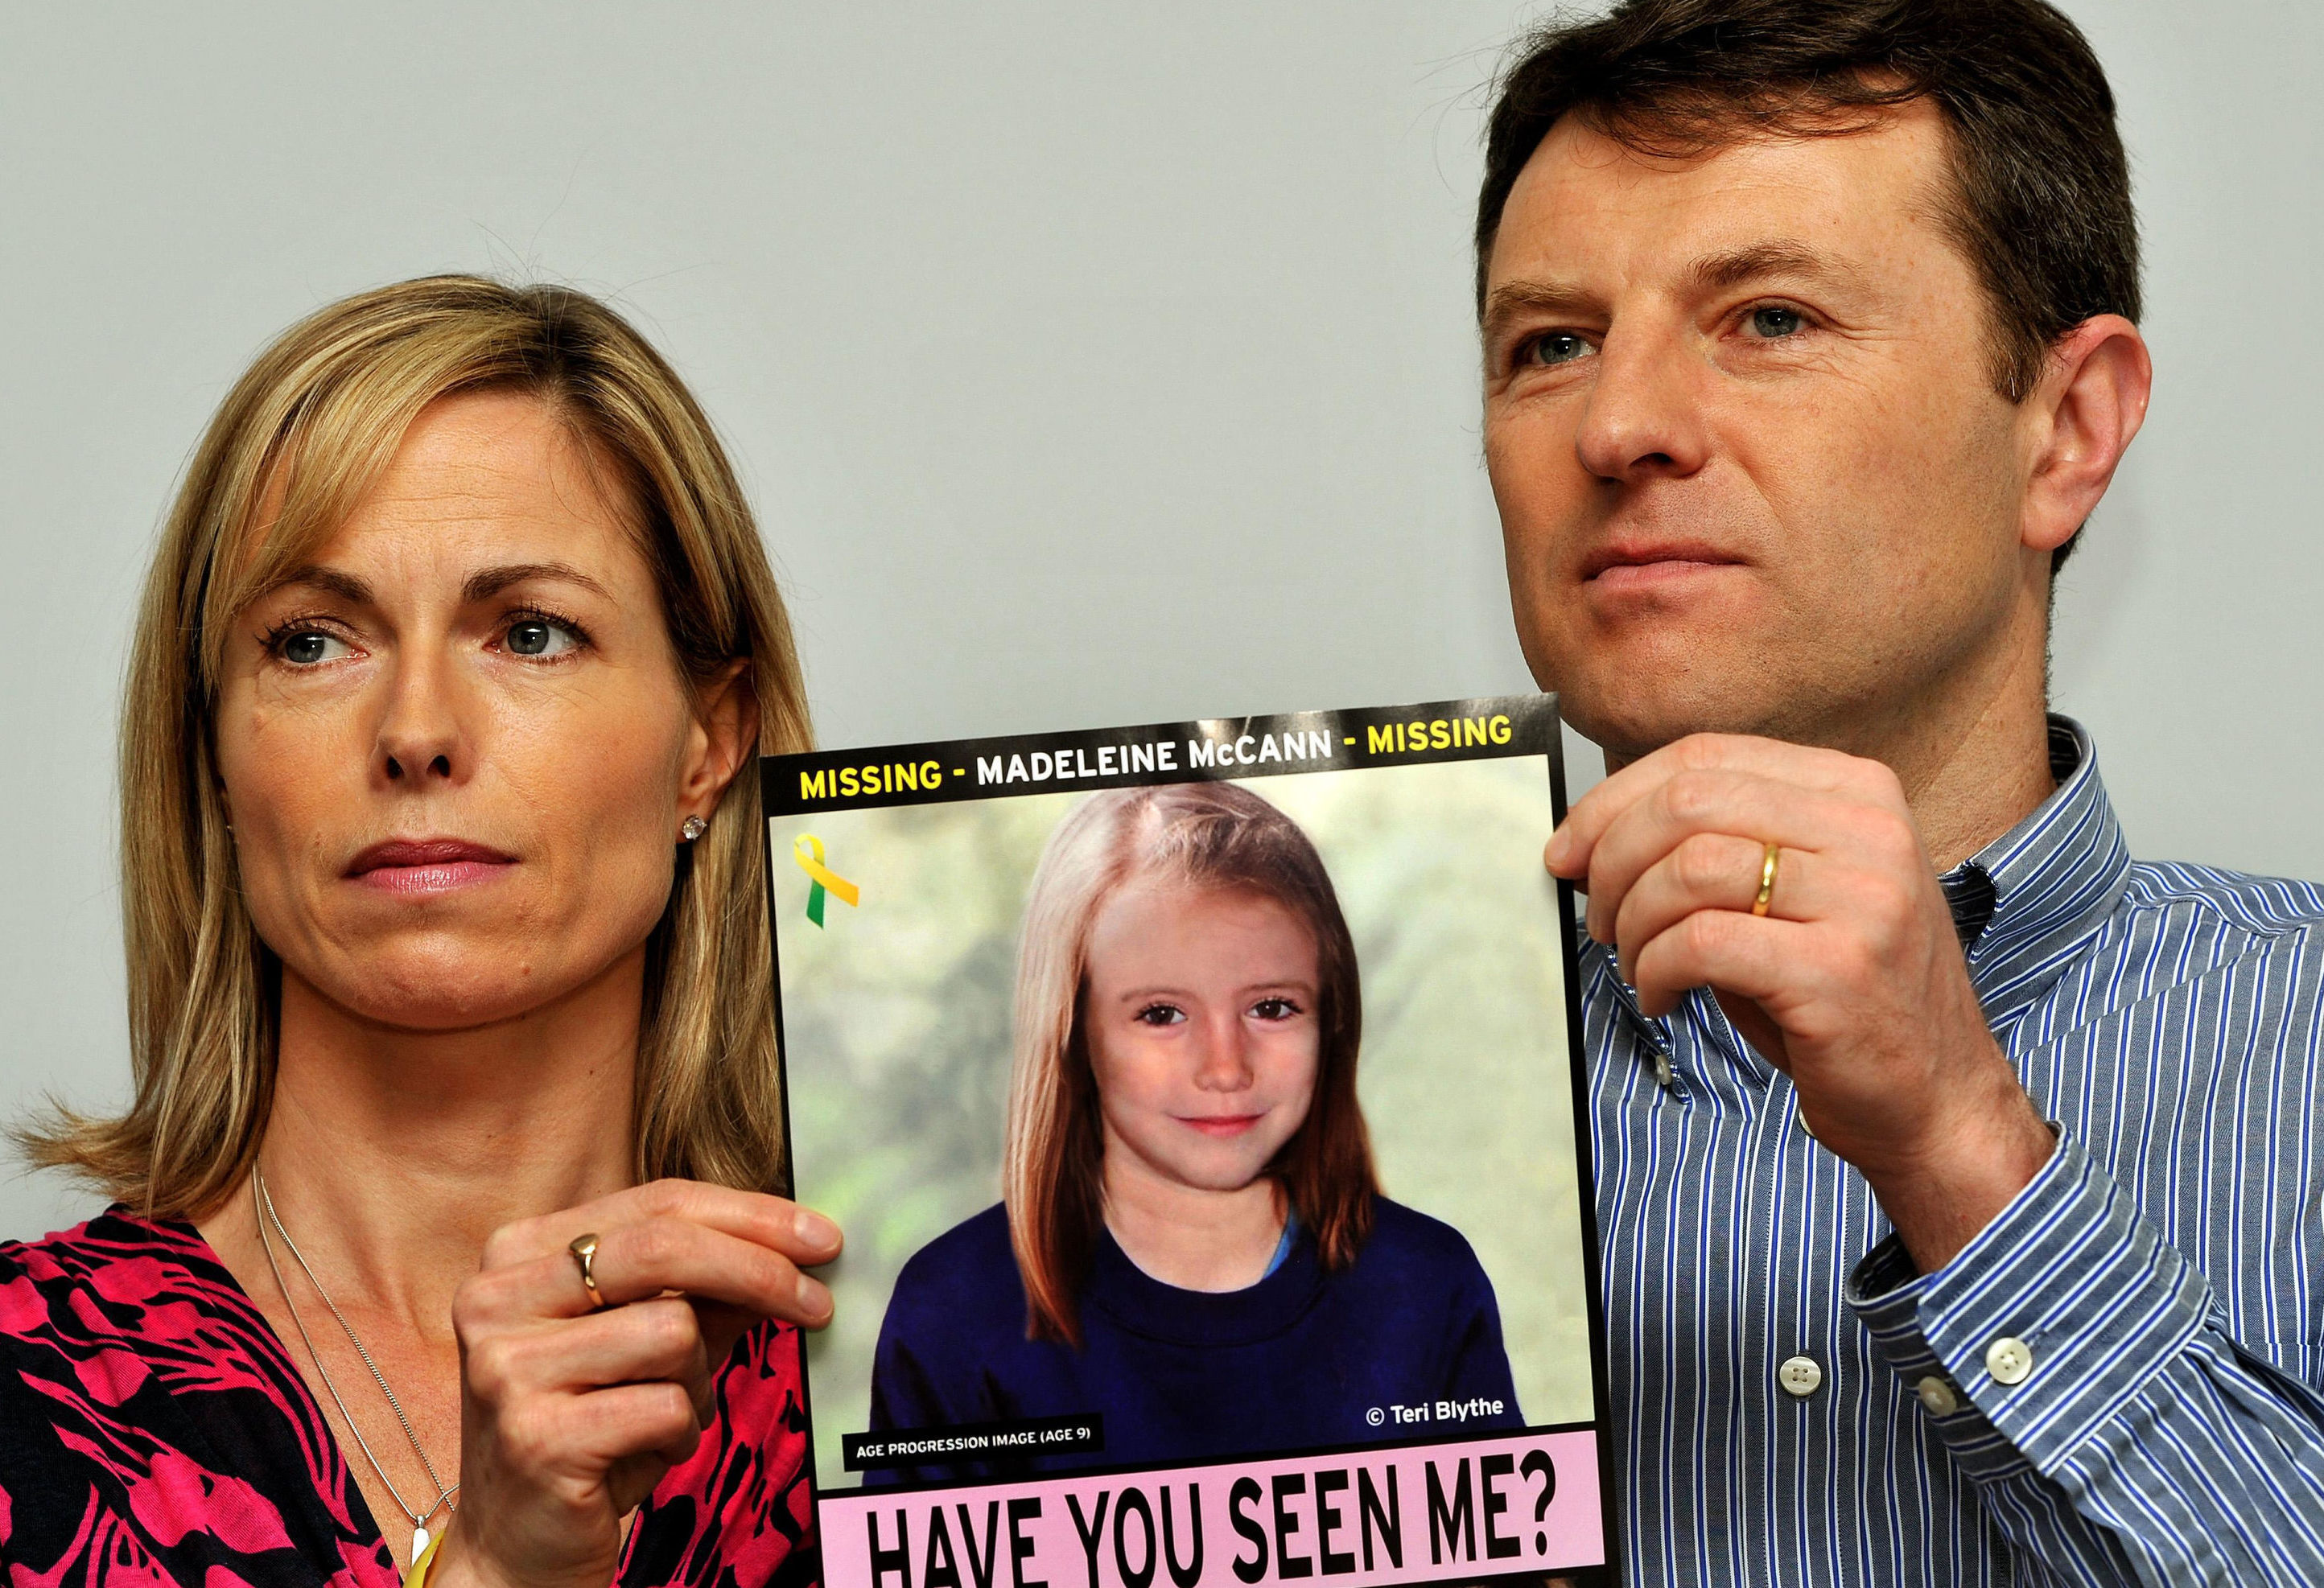 The parents of Madeleine McCann have vowed to do 'whatever it takes for as long as it takes' to find her as they prepare to mark the tenth anniversary of her disappearance. (John Stillwell/PA Wire)